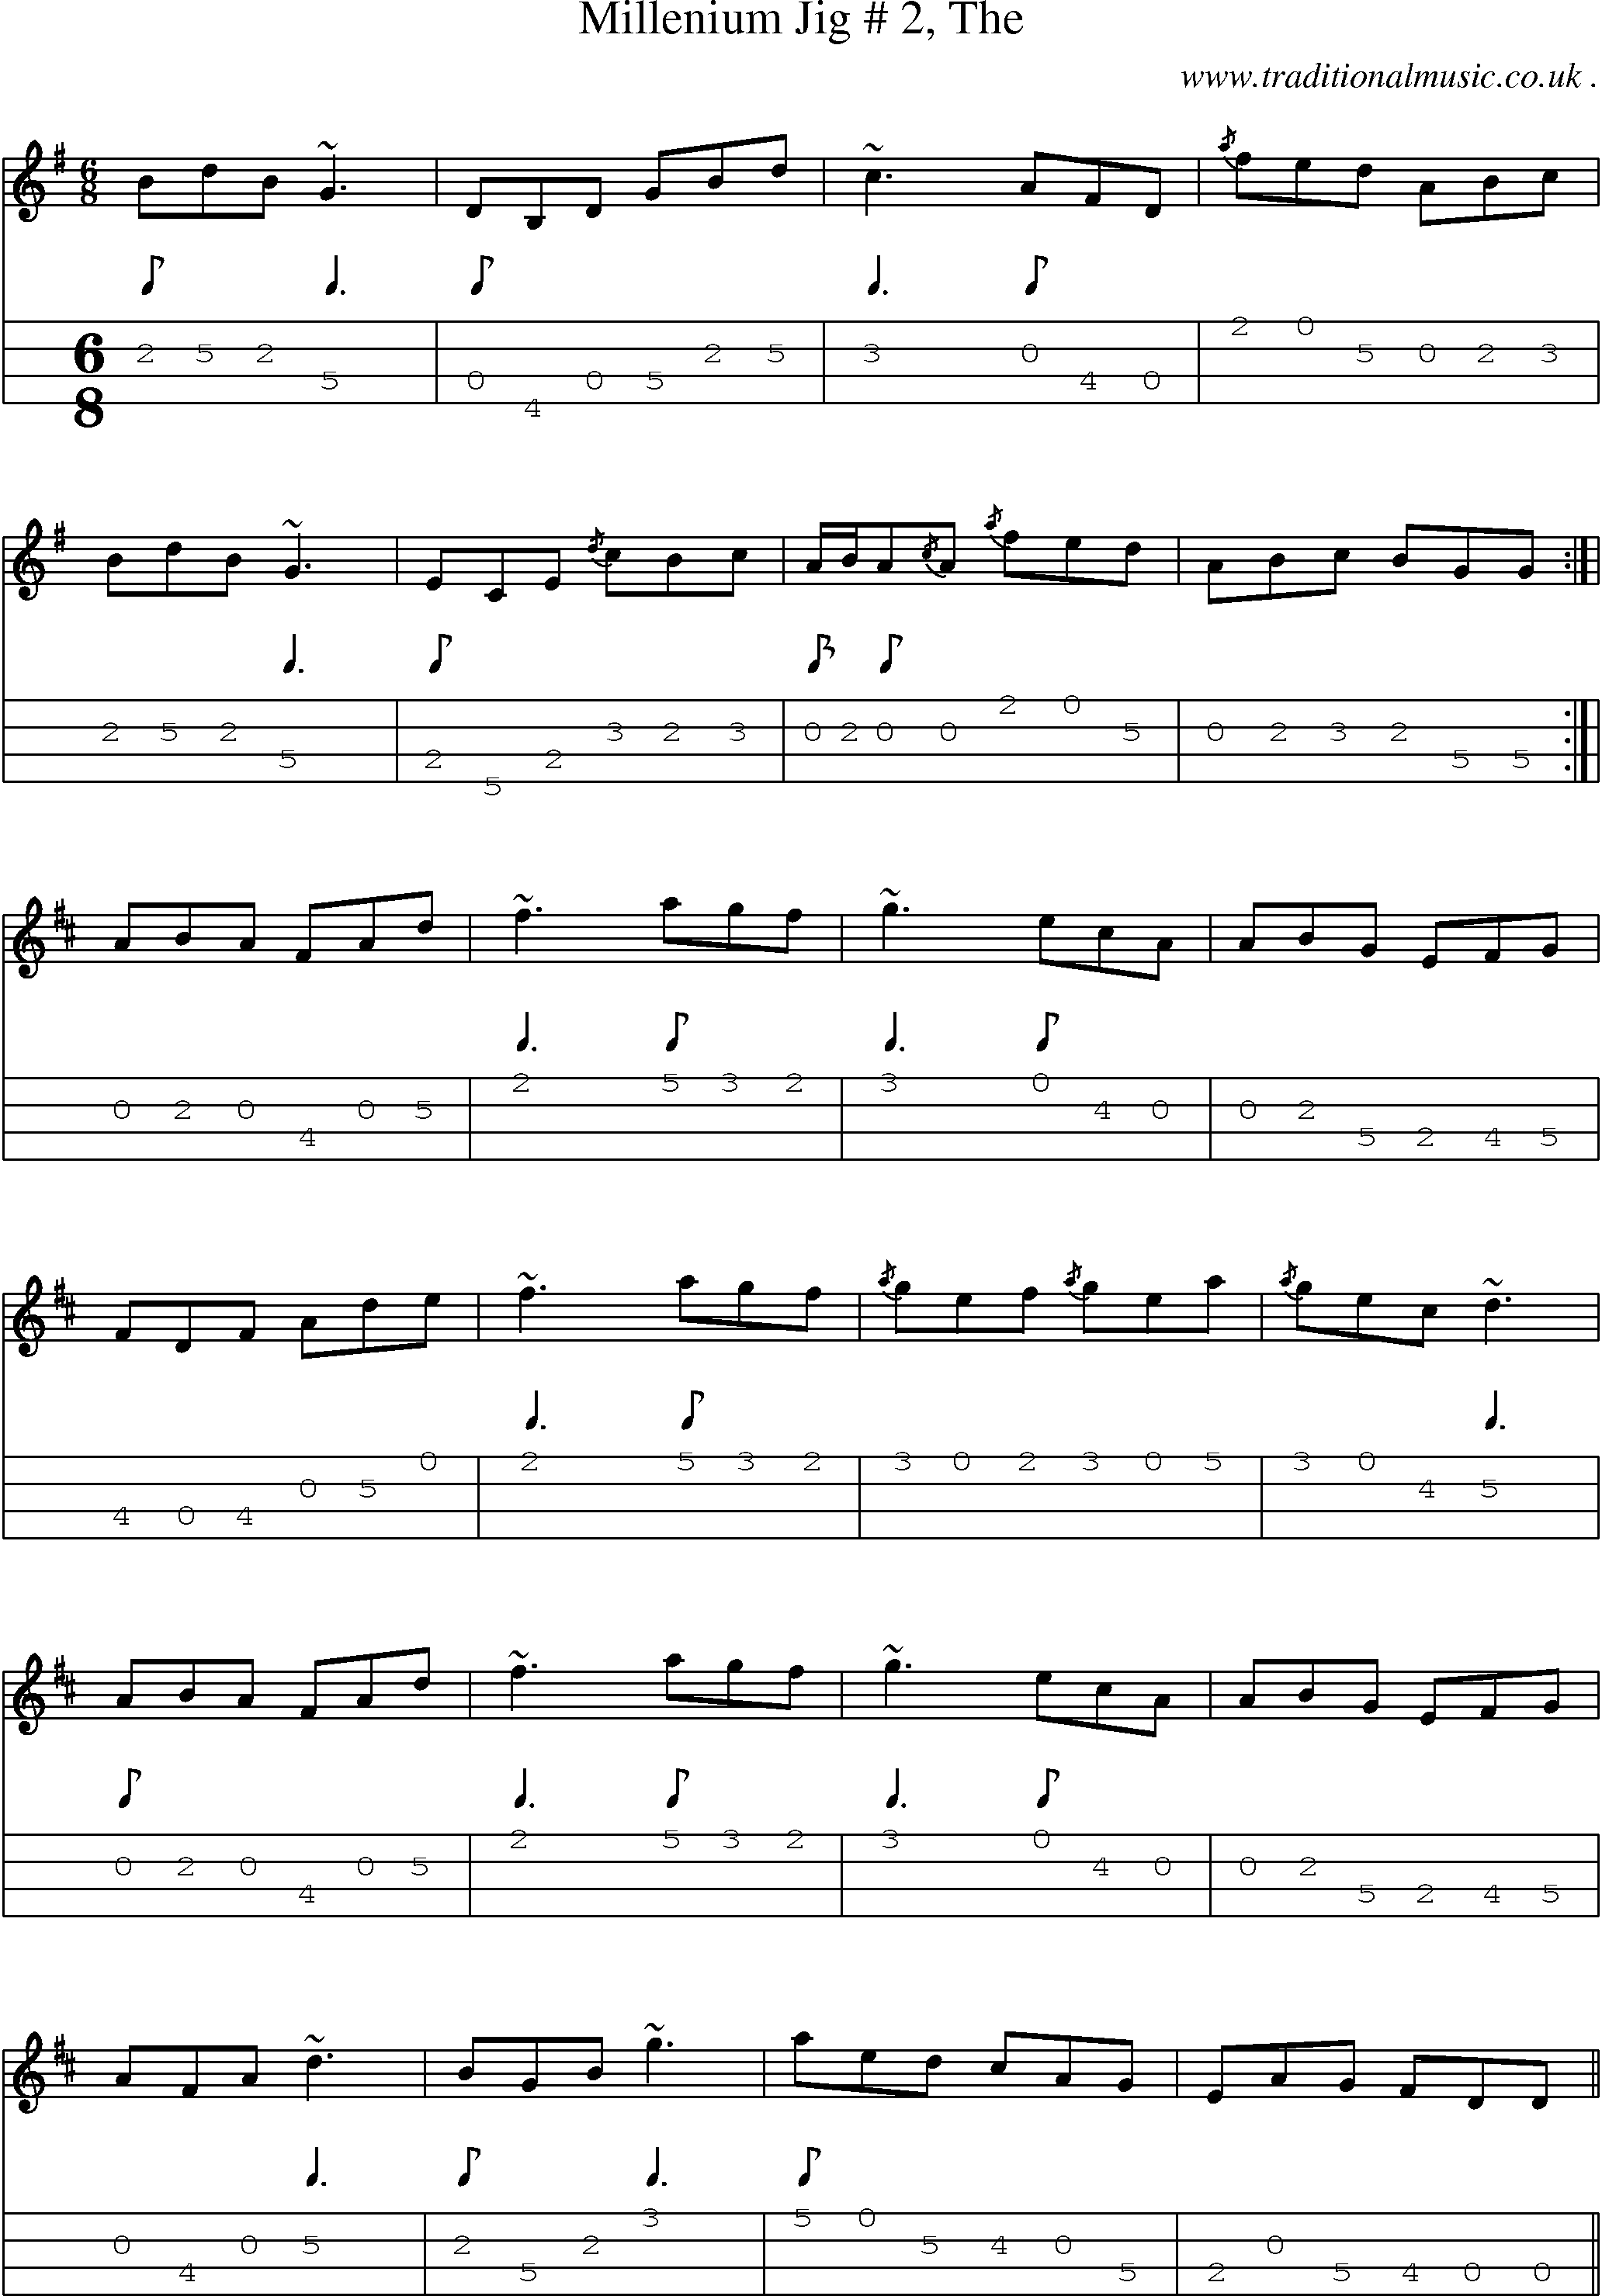 Sheet-music  score, Chords and Mandolin Tabs for Millenium Jig  2 The